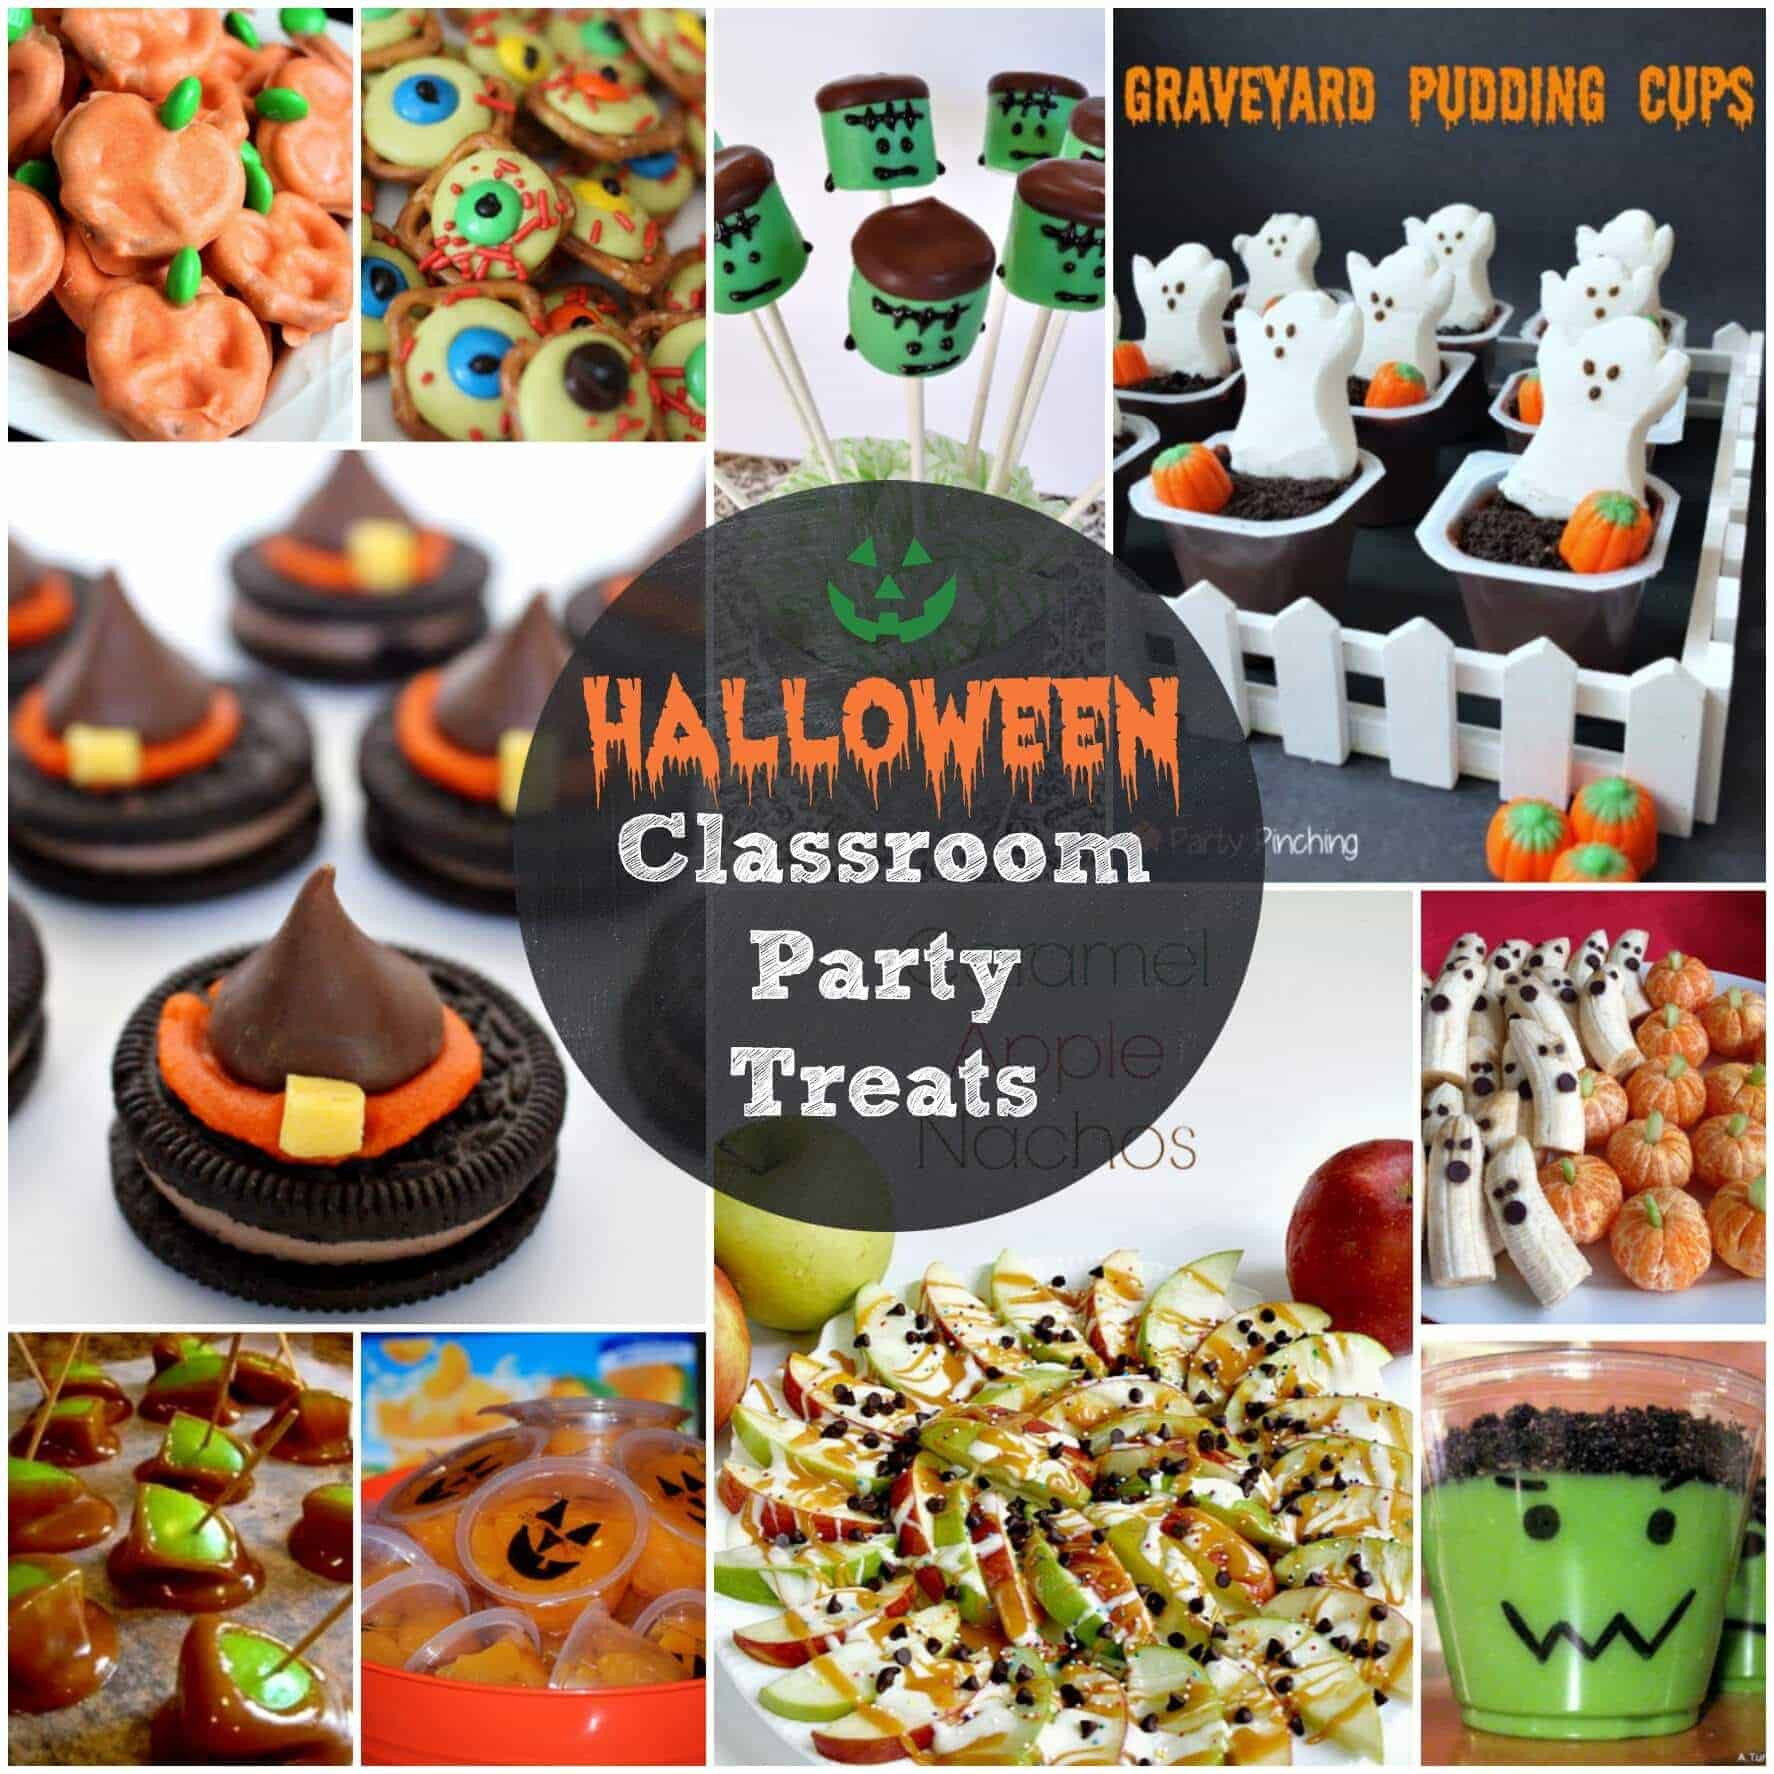 Halloween Treat Ideas For School Party
 Easy Halloween Treats for your Classroom Parties or just